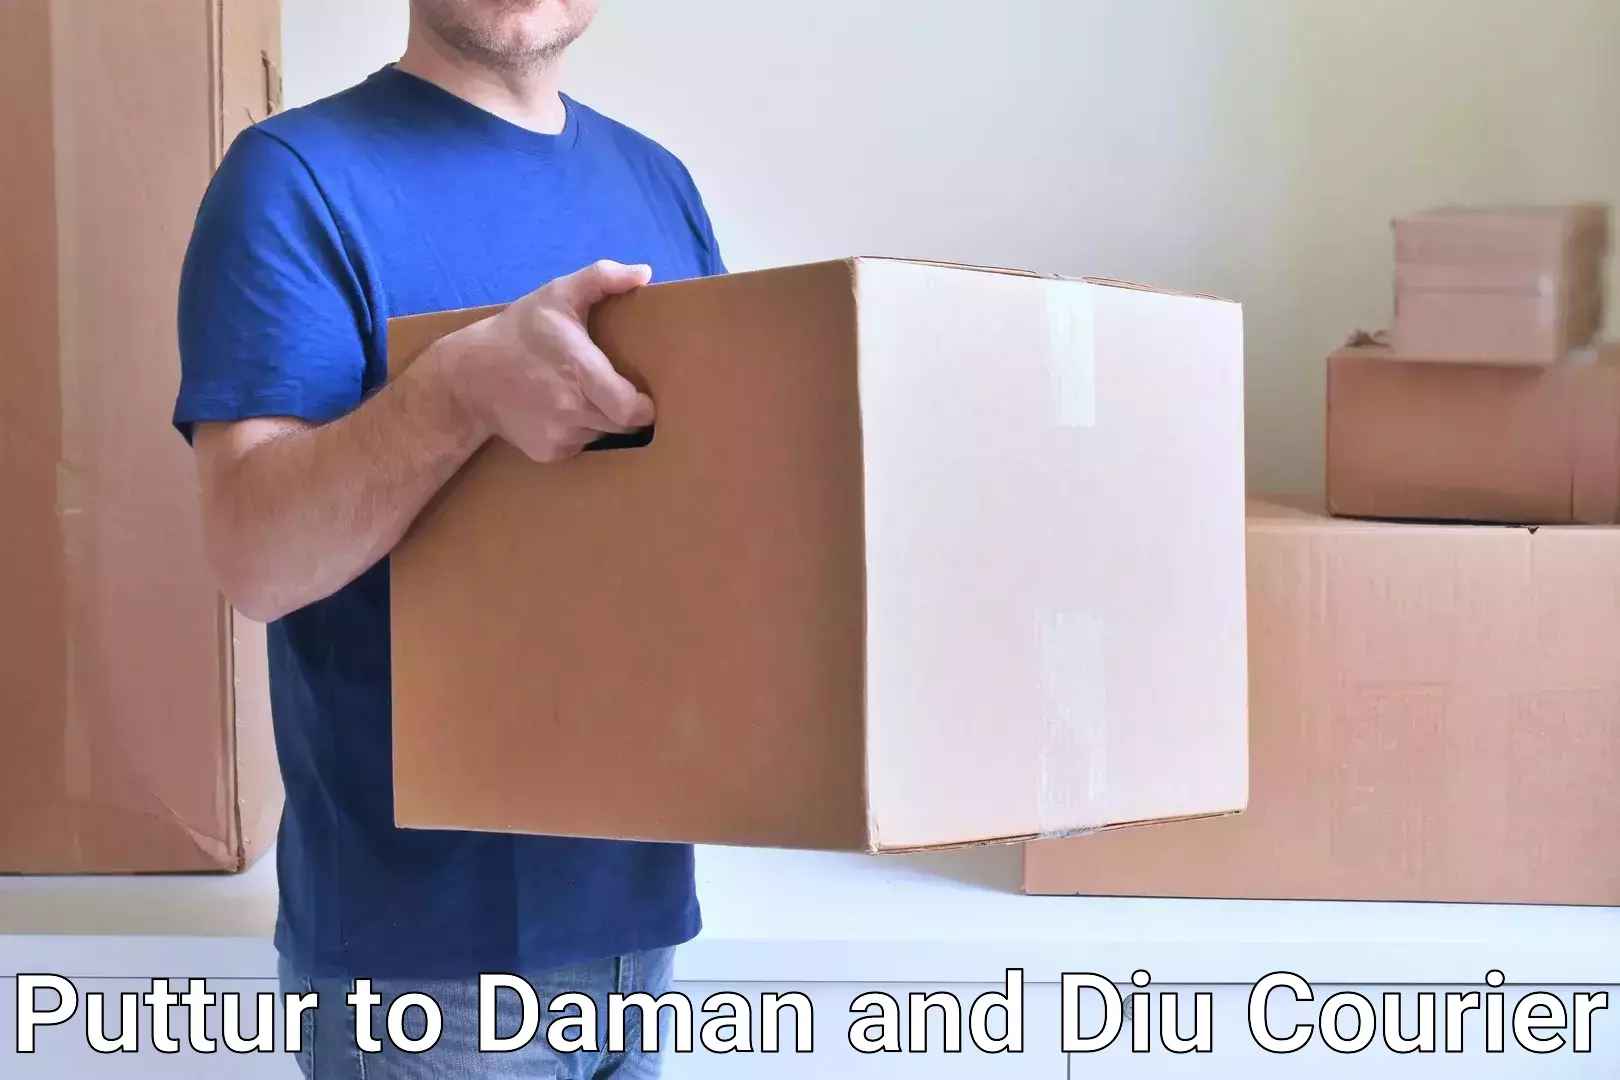 Professional courier handling Puttur to Daman and Diu